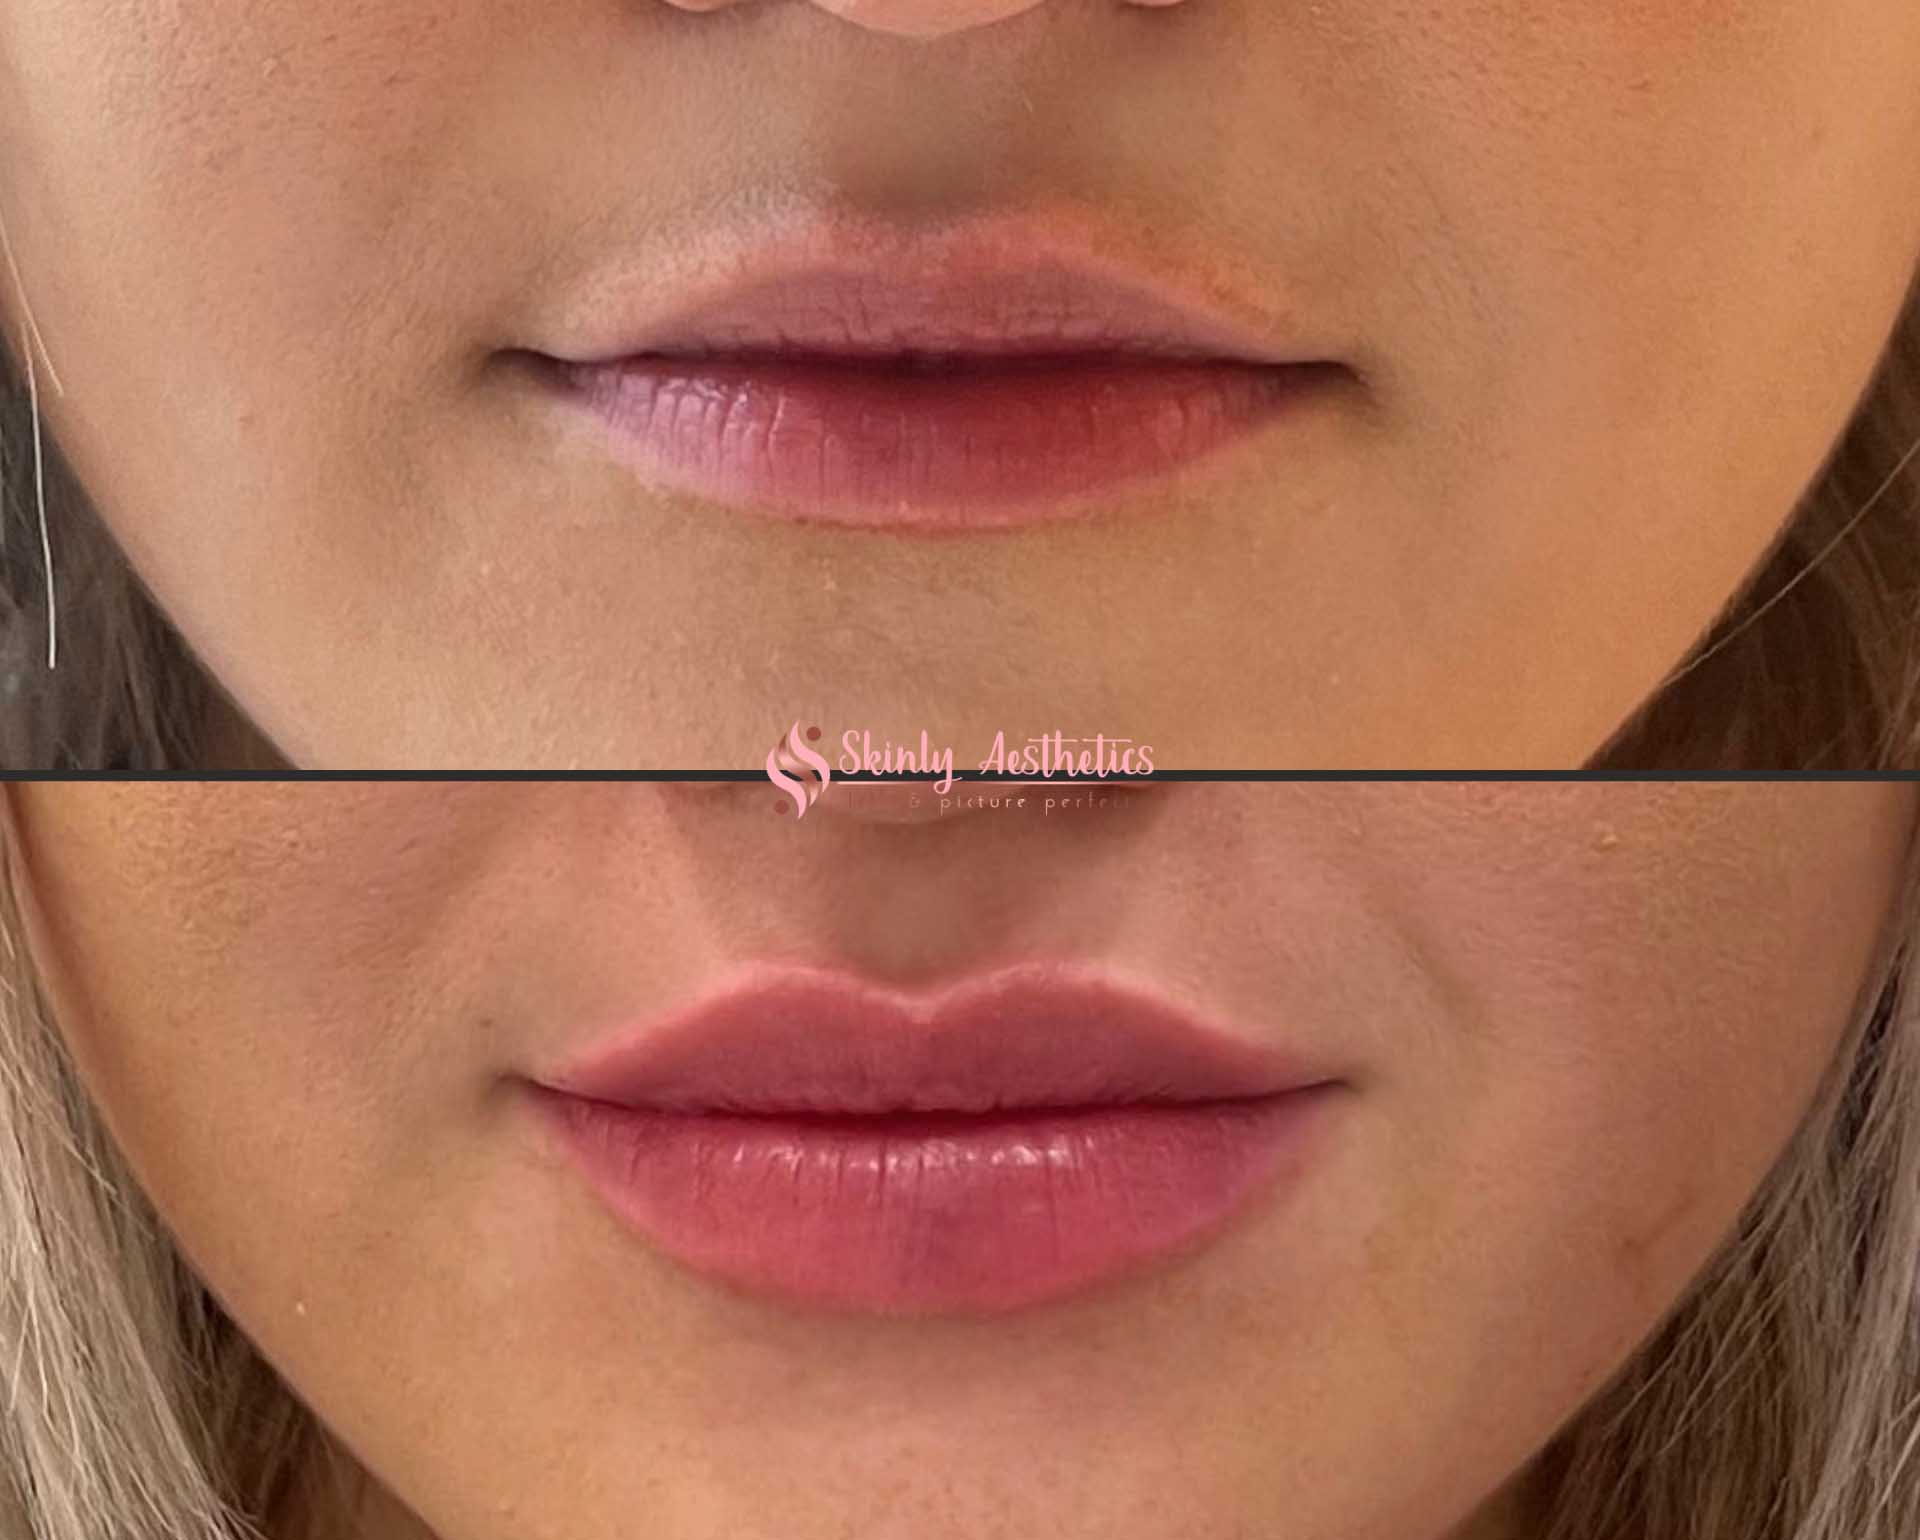 subtle lip enhancement before and results following injection of 1ml of RHA2 filler